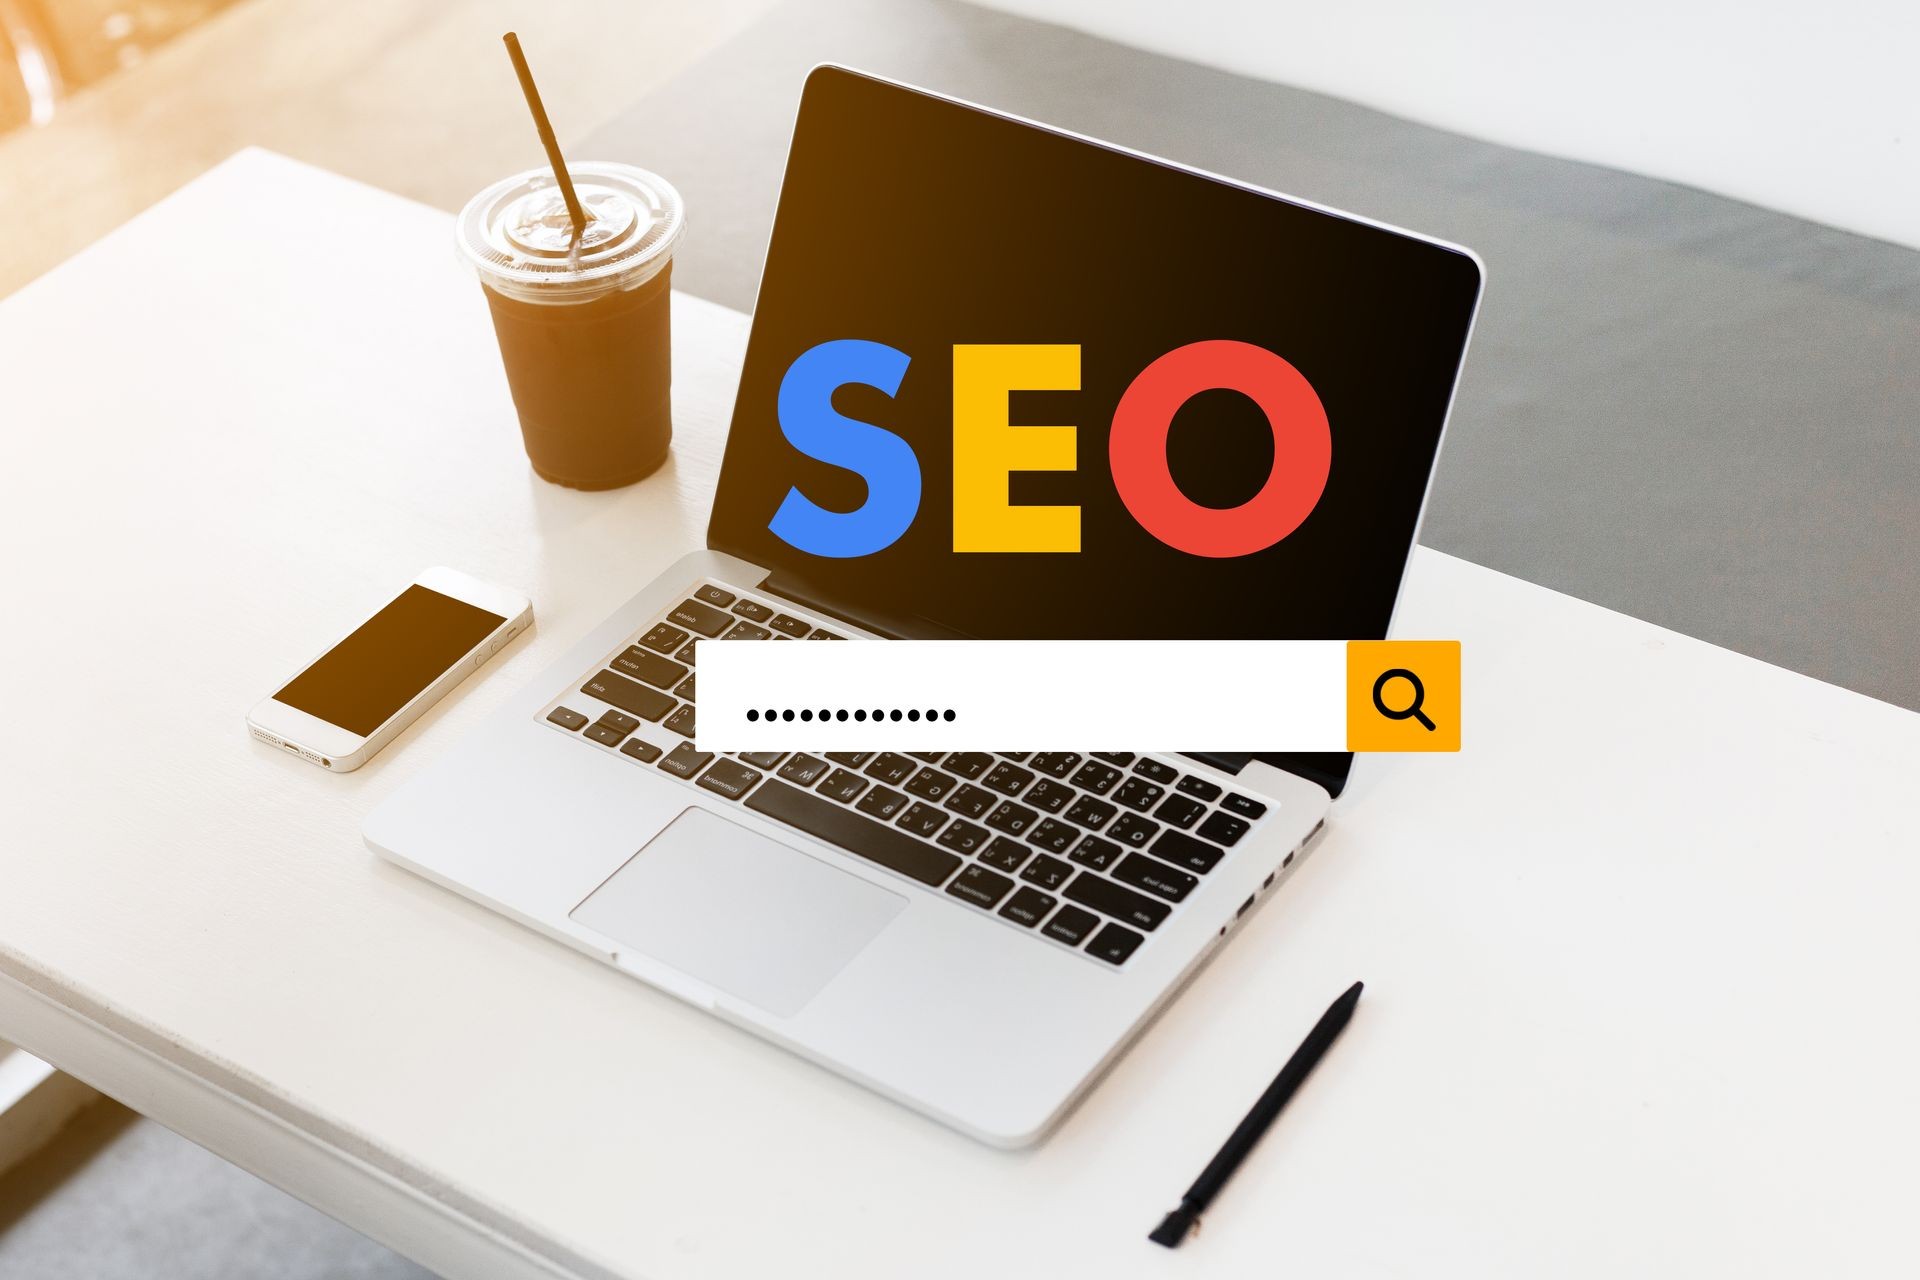 The concept of searching Engine Optimizing SEO Browsing.